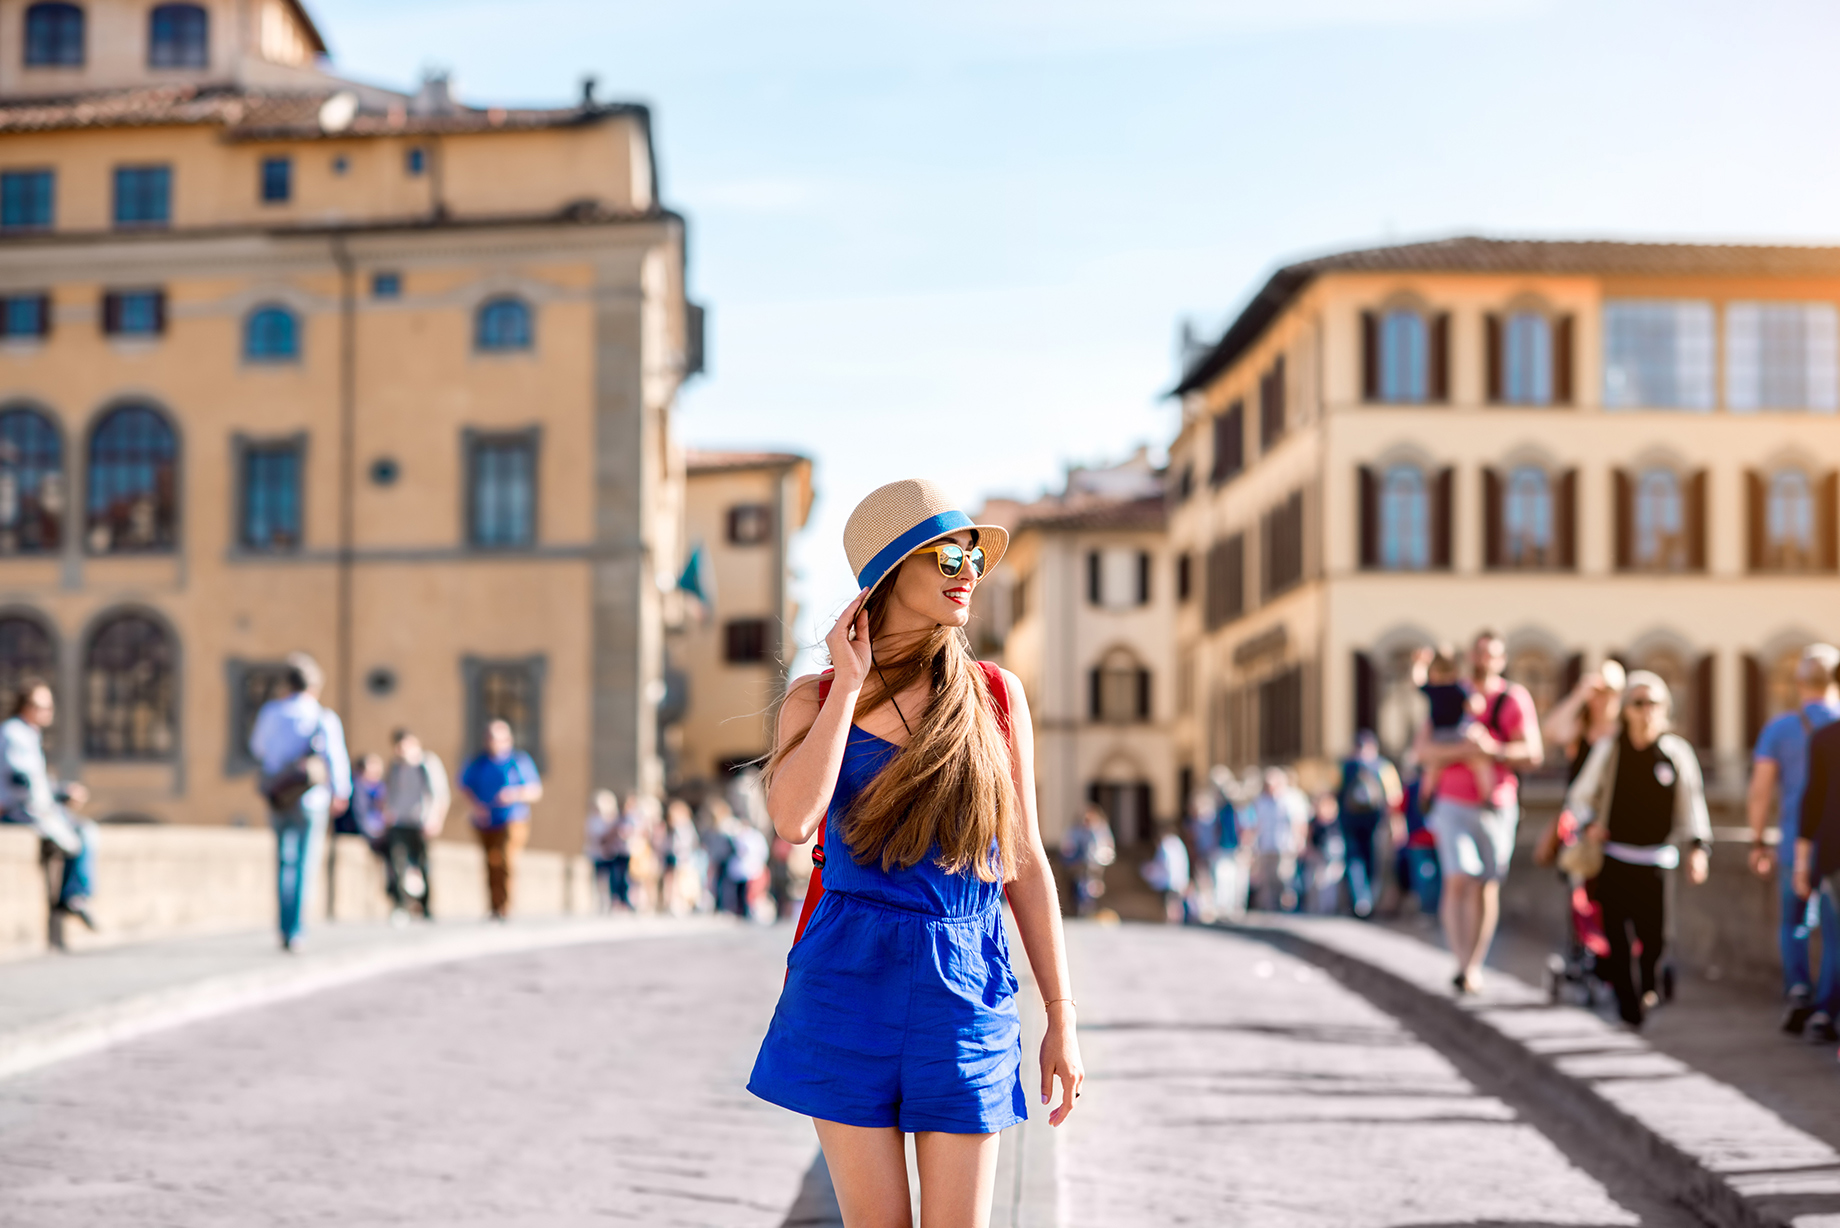 Traveller Walking On Holy Trinity Bridge In Florence City, Italy